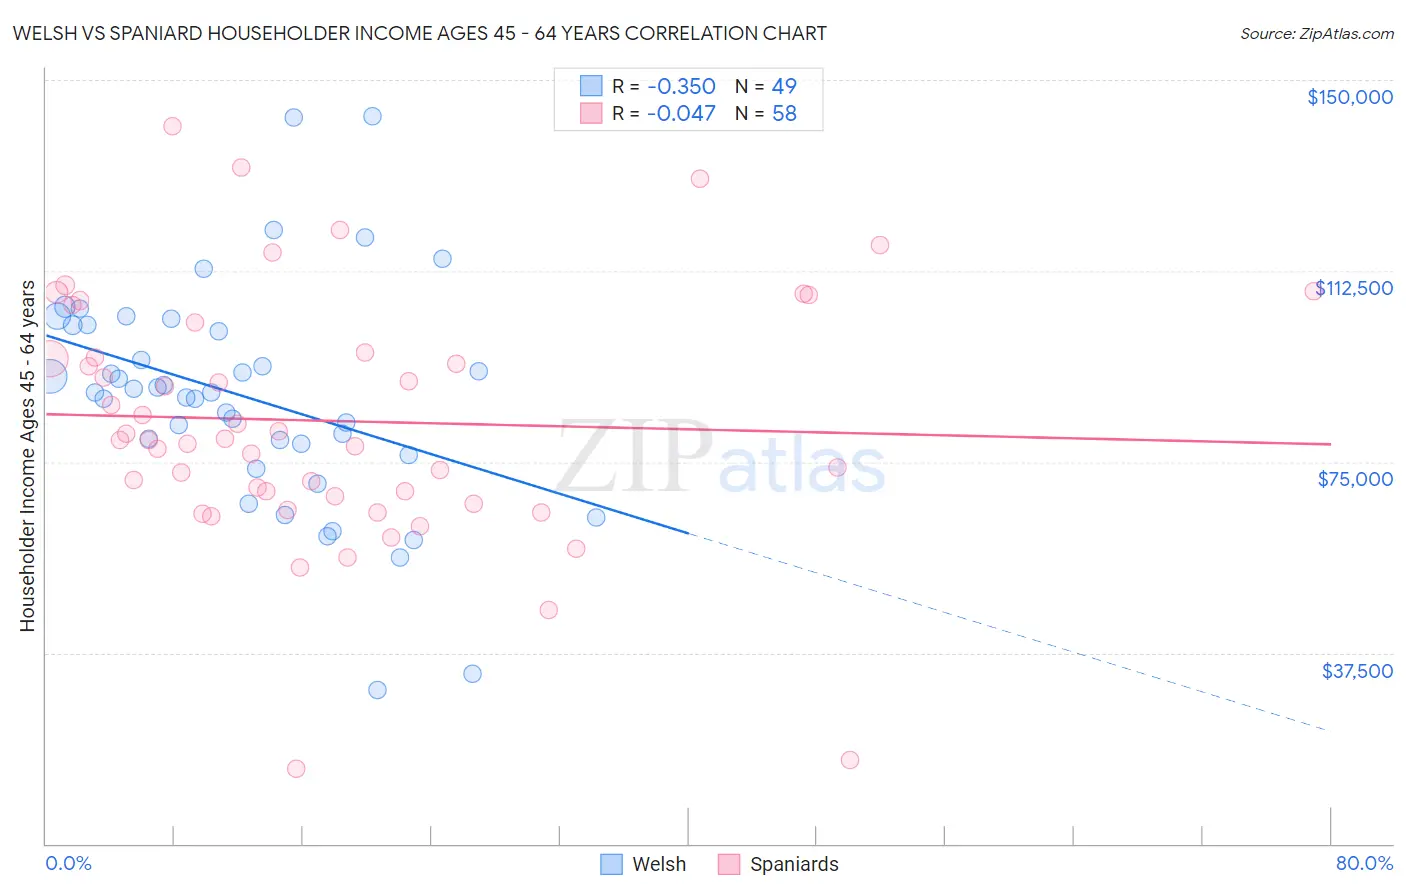 Welsh vs Spaniard Householder Income Ages 45 - 64 years